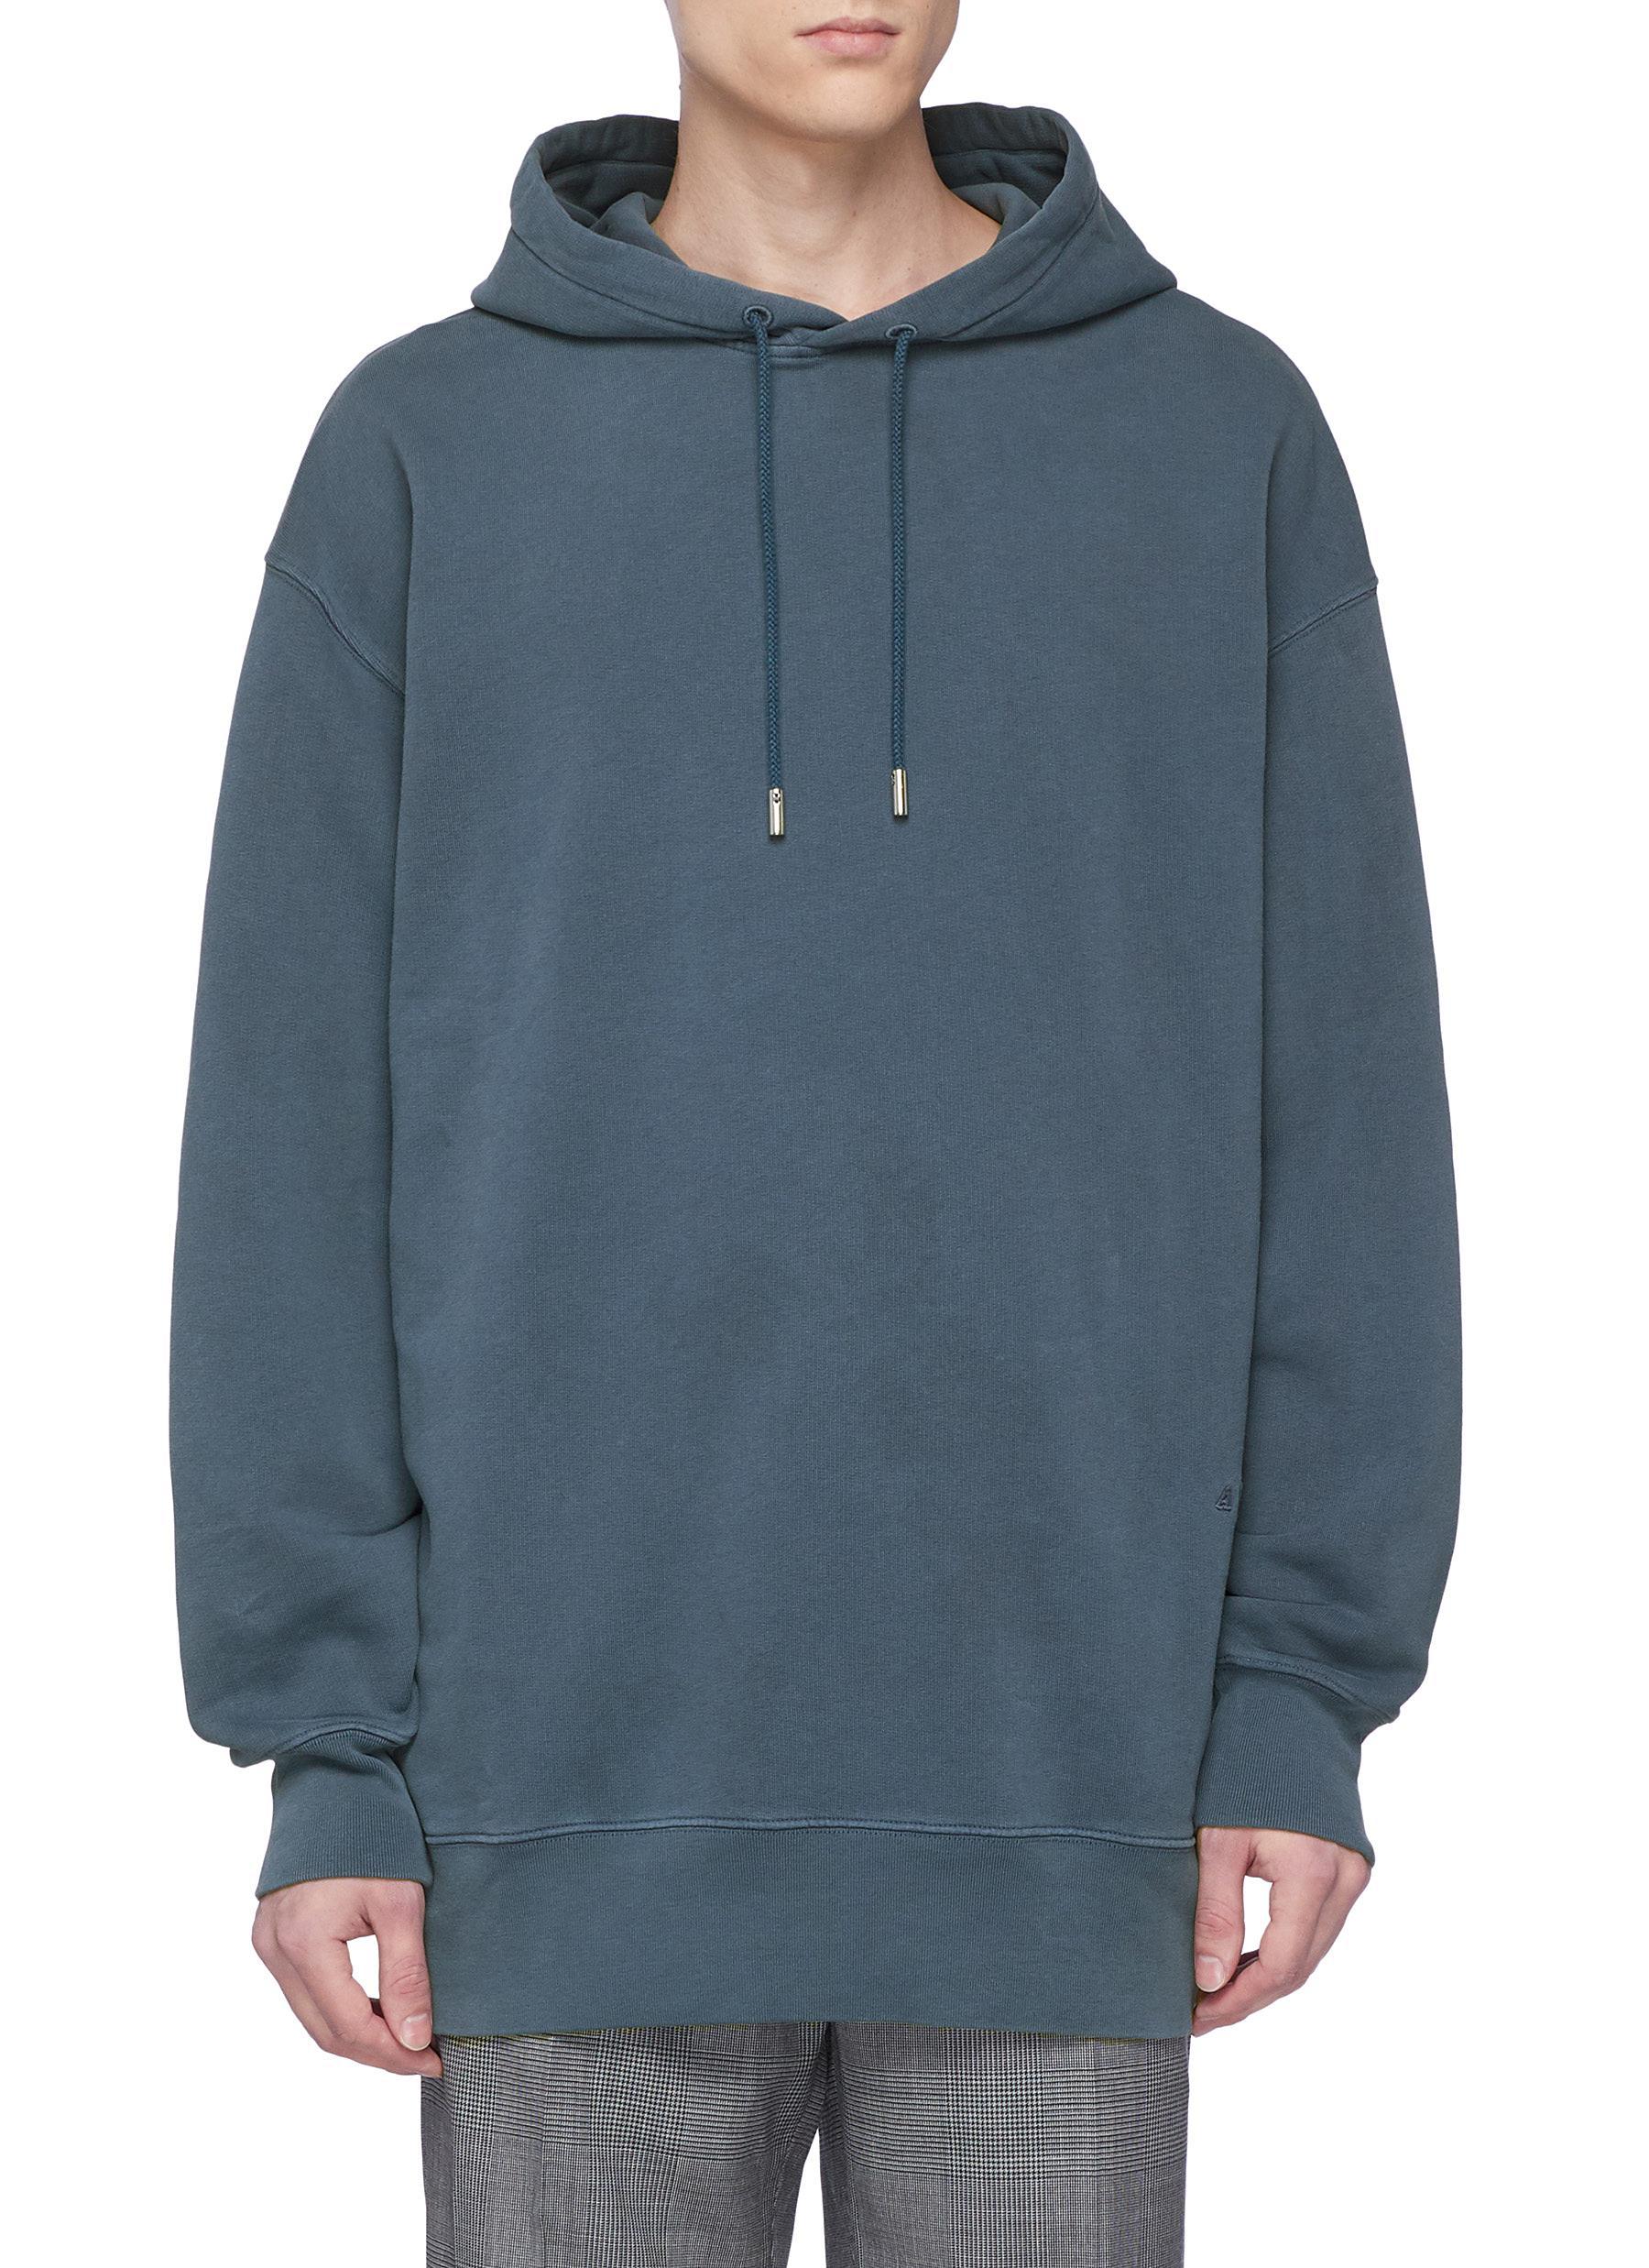 Acne Studios 'fala' Oversized Washed Hoodie in Blue for Men - Lyst